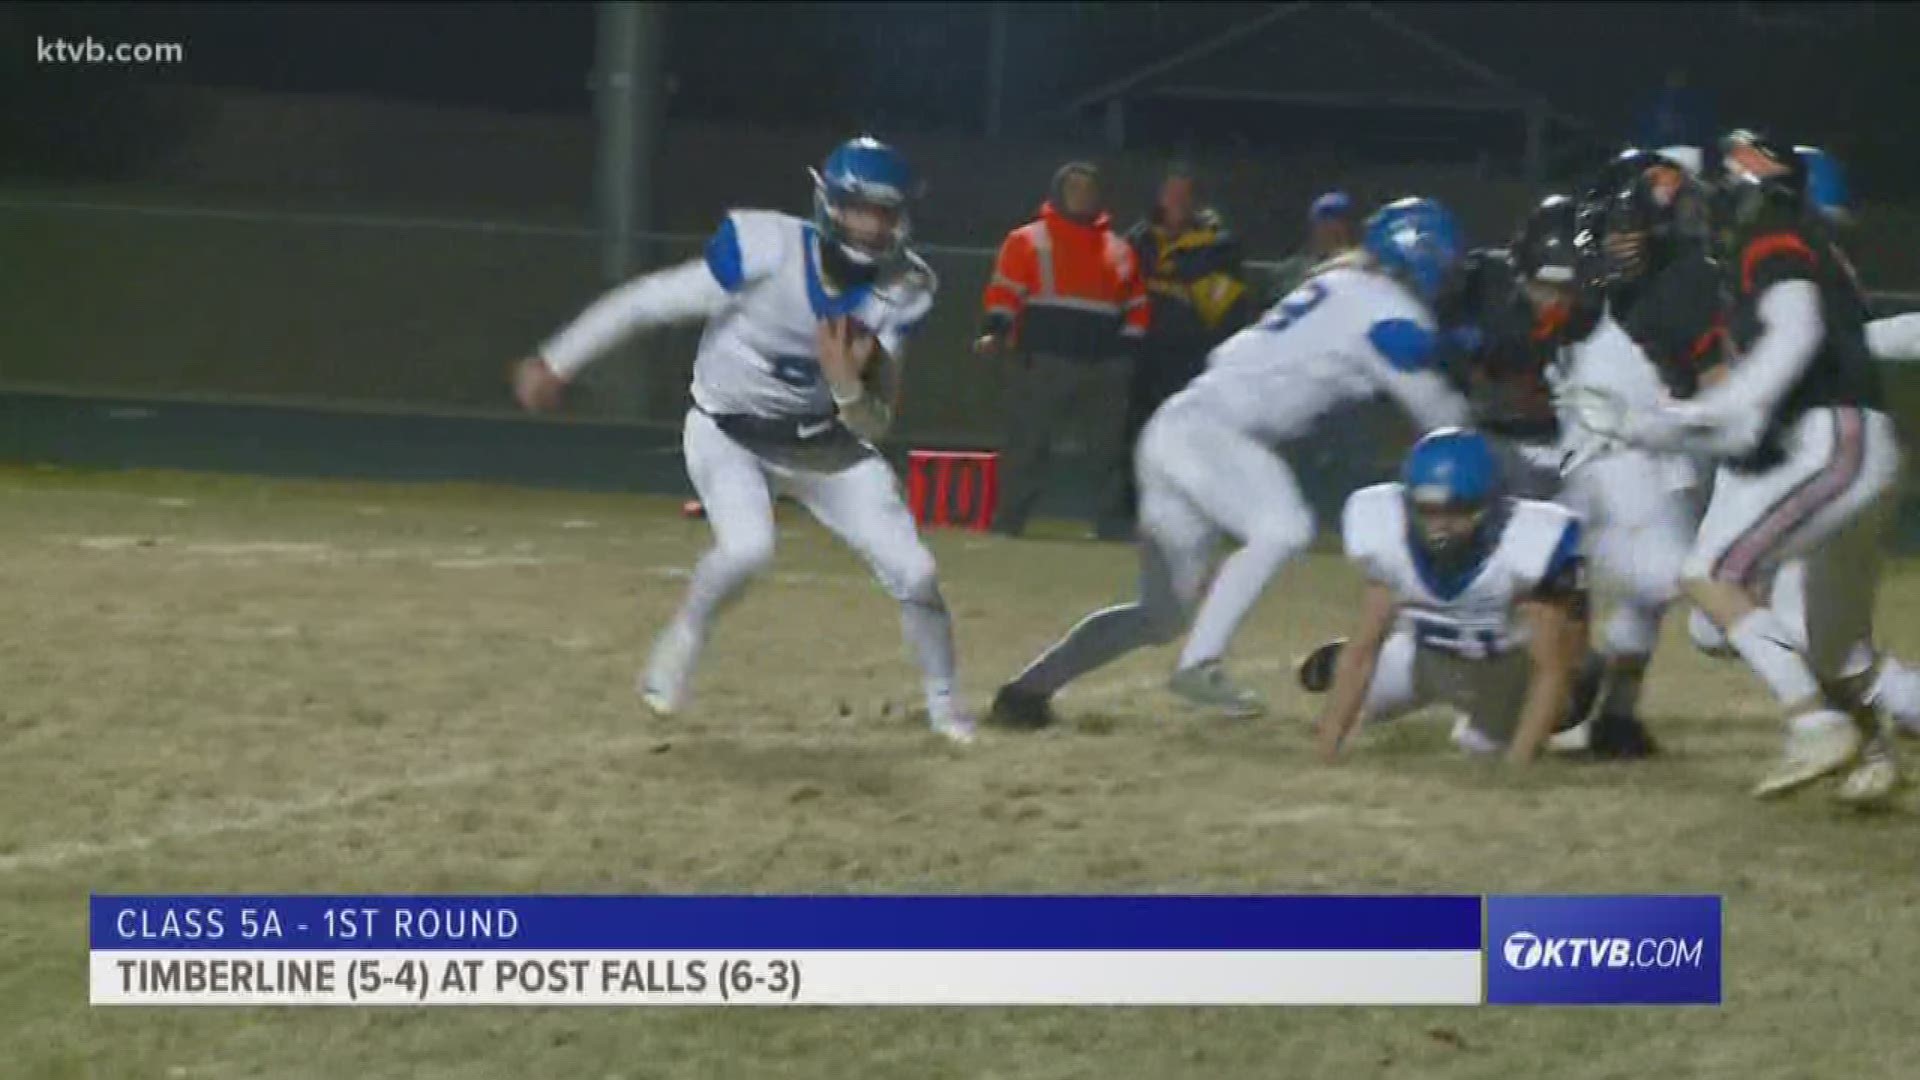 Timberline (5-4) beat Post Falls (6-3), 19-7, winning their first playoff game in school history.